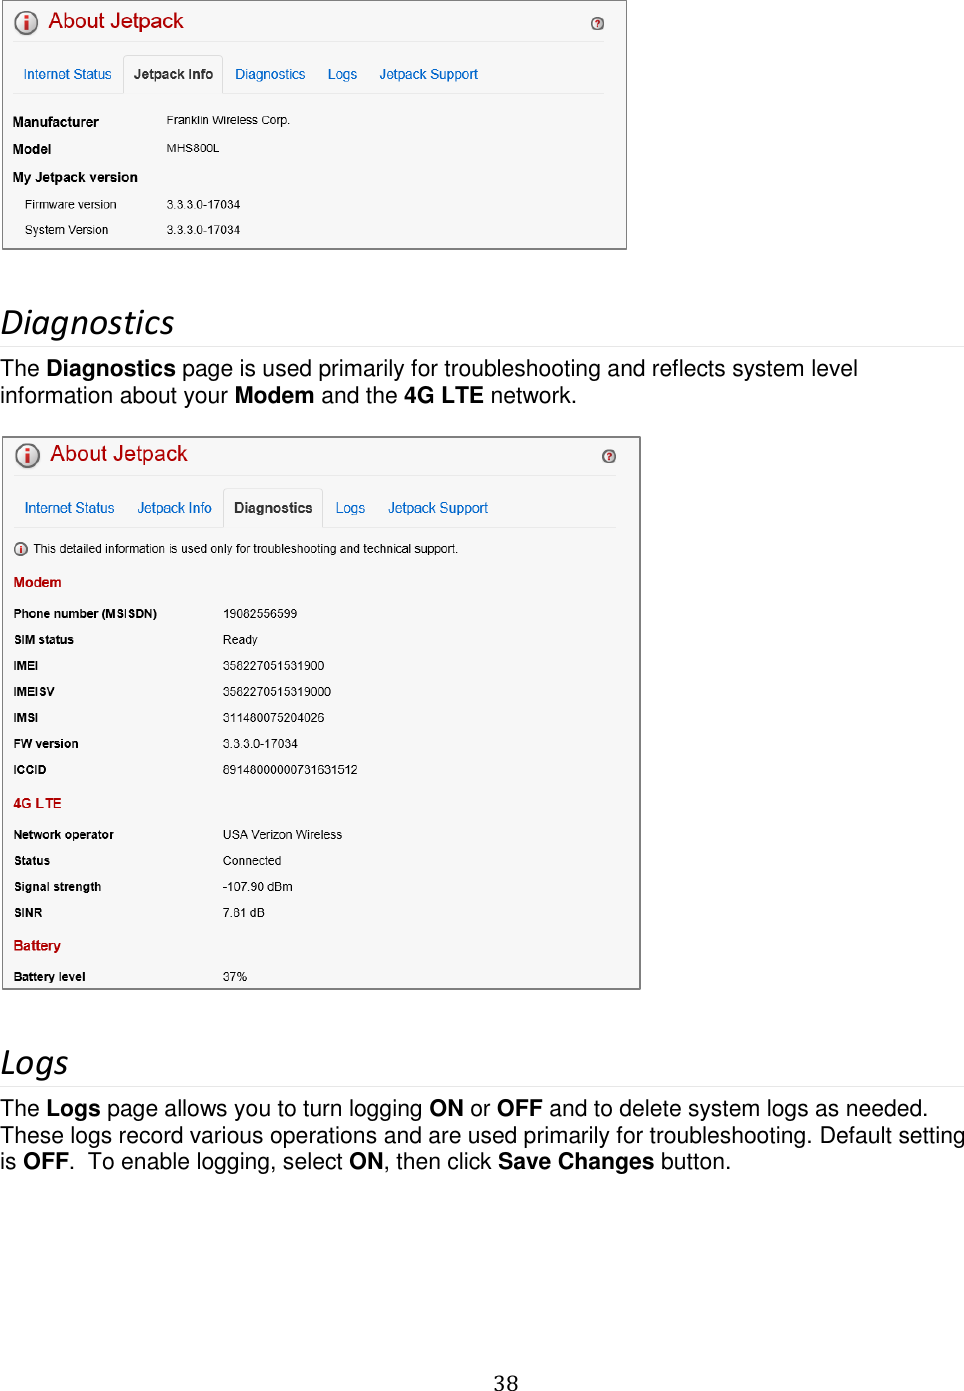   38    Diagnostics The Diagnostics page is used primarily for troubleshooting and reflects system level information about your Modem and the 4G LTE network.    Logs The Logs page allows you to turn logging ON or OFF and to delete system logs as needed. These logs record various operations and are used primarily for troubleshooting. Default setting is OFF.  To enable logging, select ON, then click Save Changes button.  